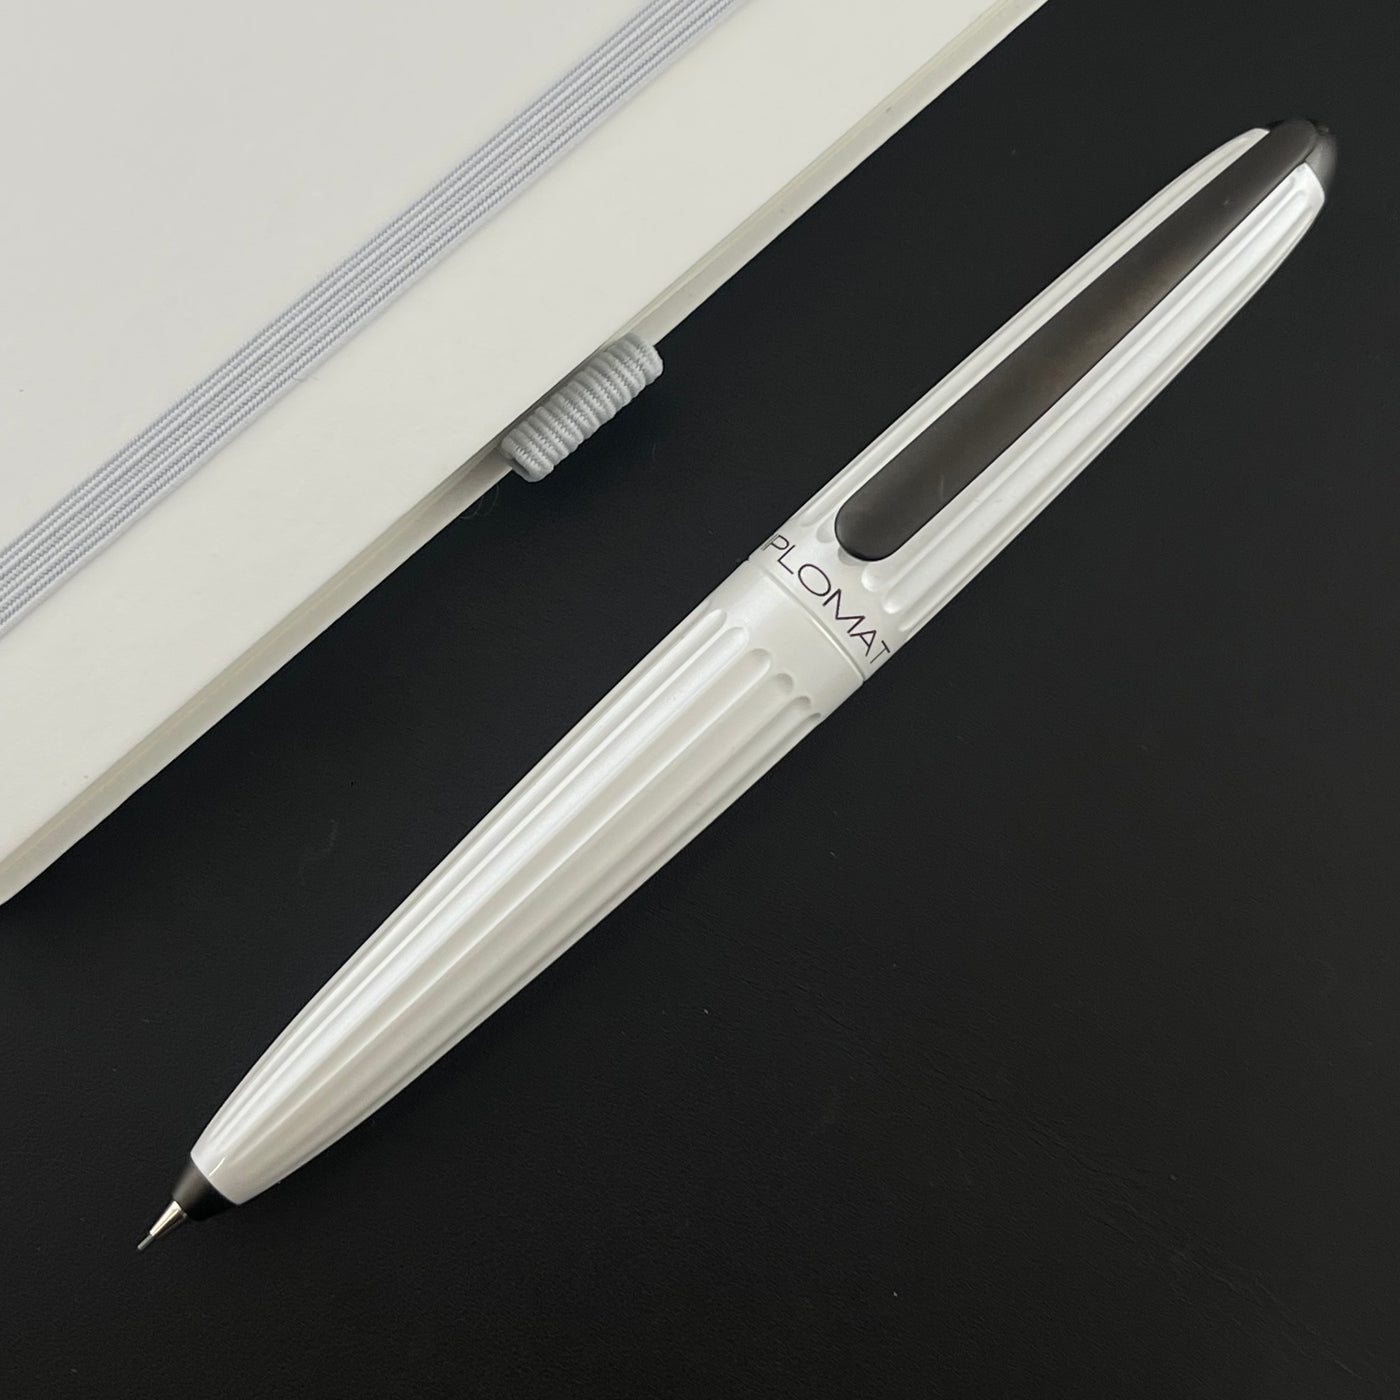 Diplomat Aero Mechanical Pencil - Lacquered White (0.7mm)